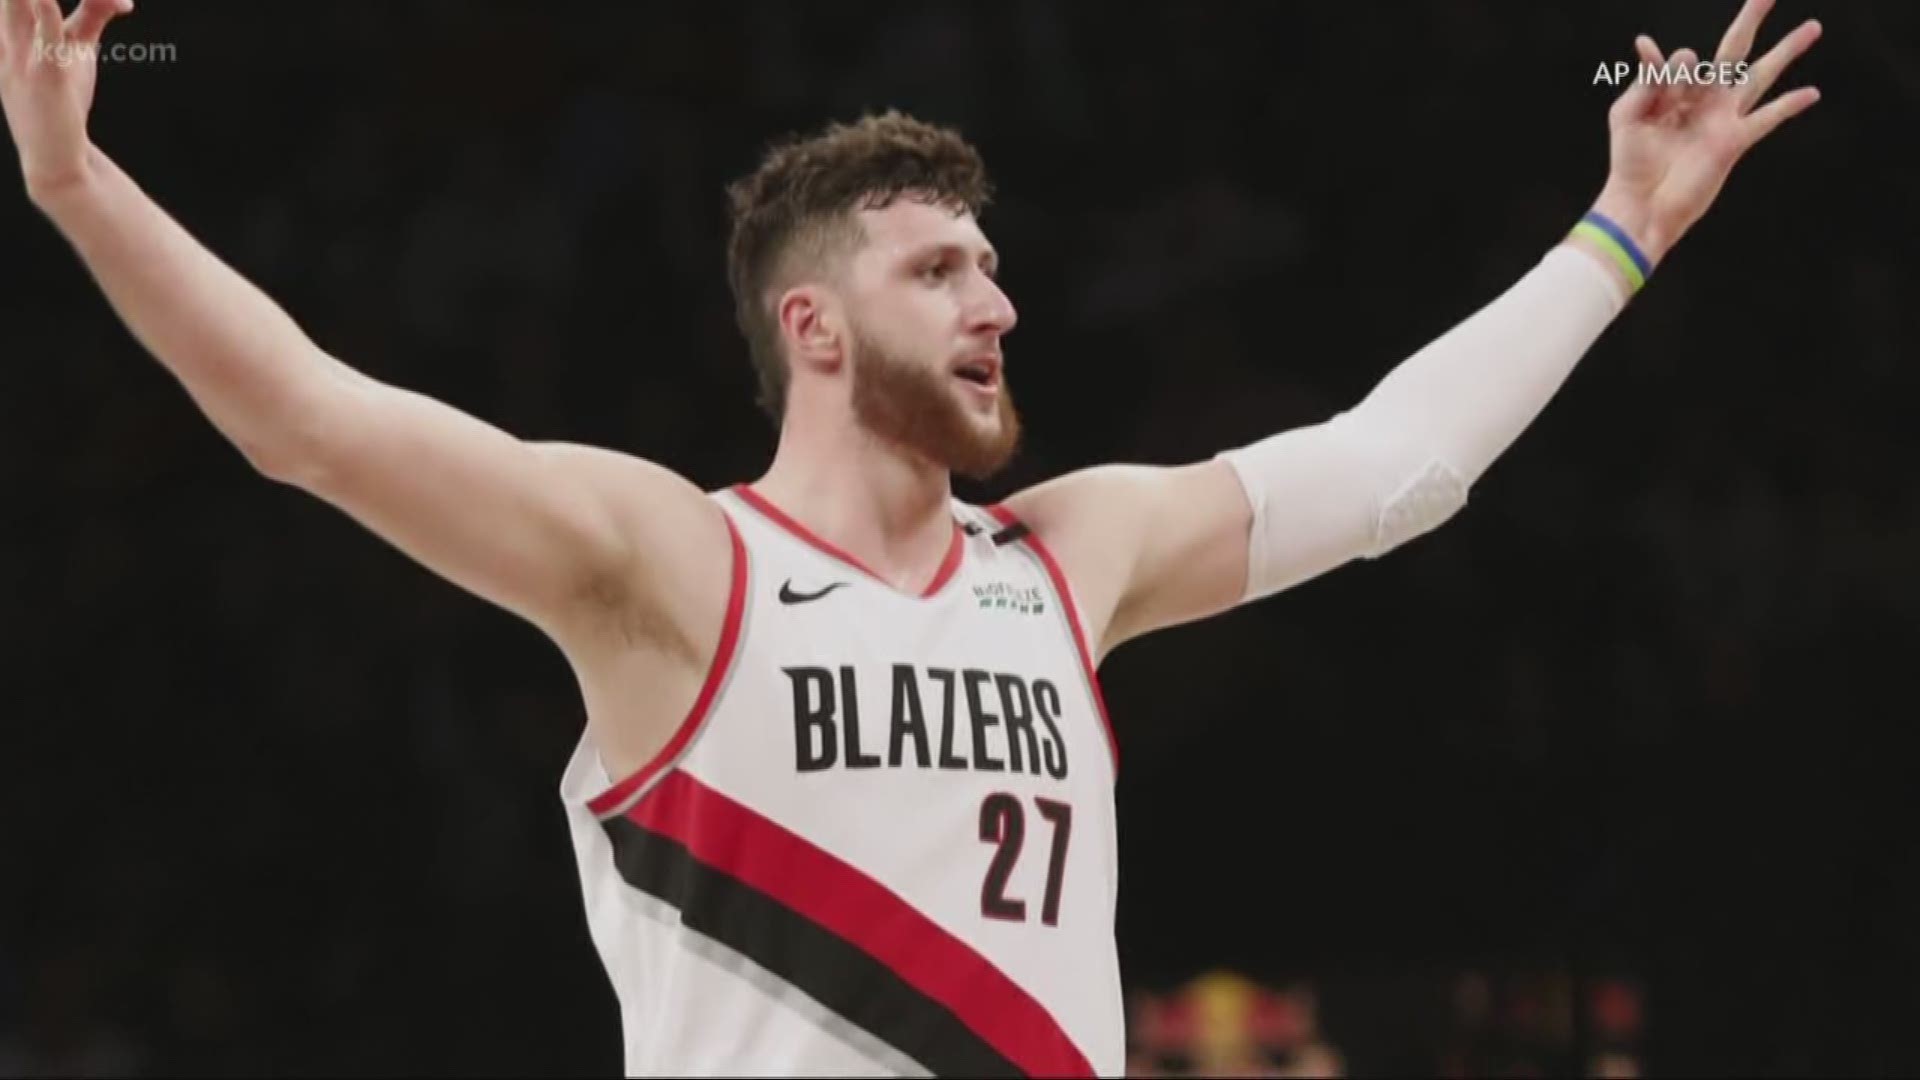 The Portland Trail Blazers are currently tied in the standings with the Oklahoma City Thunder for third place in the Western Conference. KGW's Orlando Sanchez and Art Edwards debate whether Portland can finish the season that high in the playoff seeding.